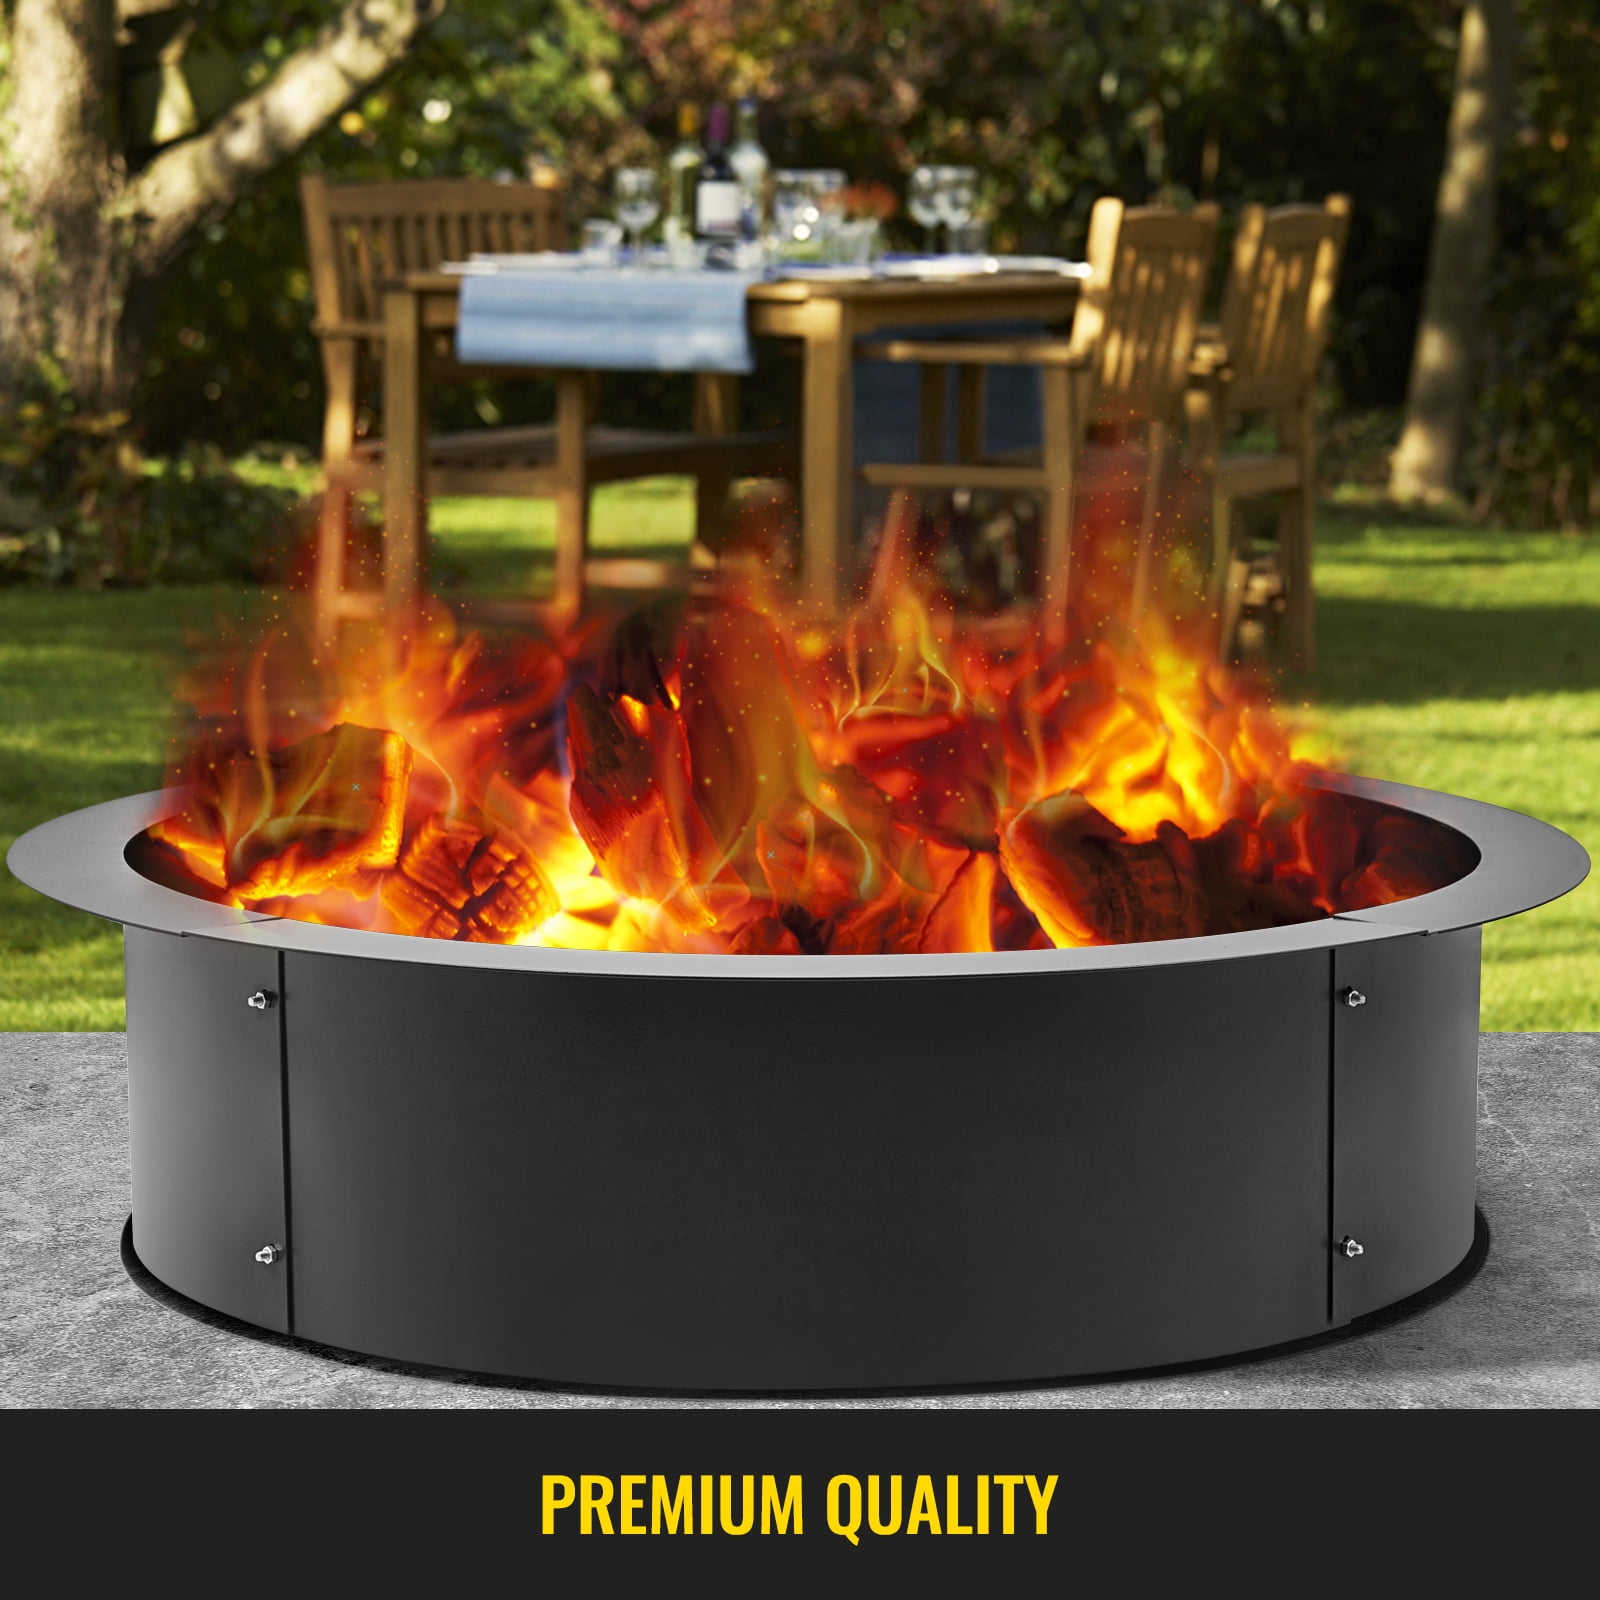 Backyard 36 x 30 x 10 Inch Fire Pit Ring 36-Inch Outer/30-Inch Inner Diameter Heavy Duty 2mm Metal Steel Rim DIY Fire Pit Rim Above or In-Ground for Camping Outdoors 